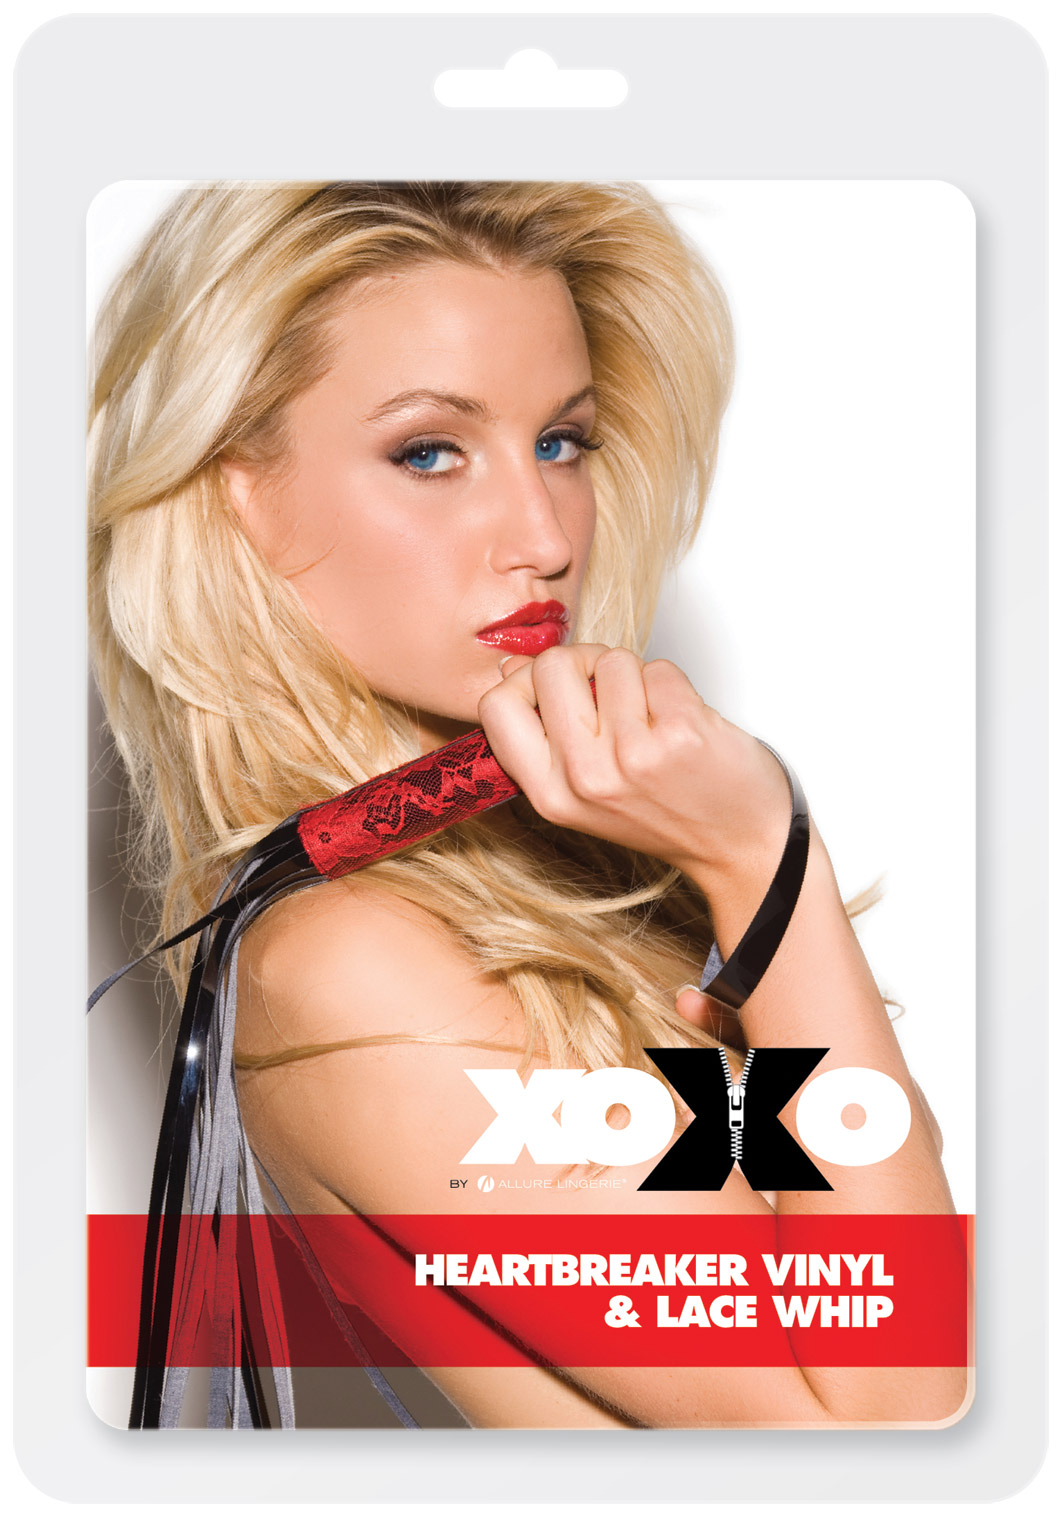 Heartbreaker Vinyl and Lace Whip